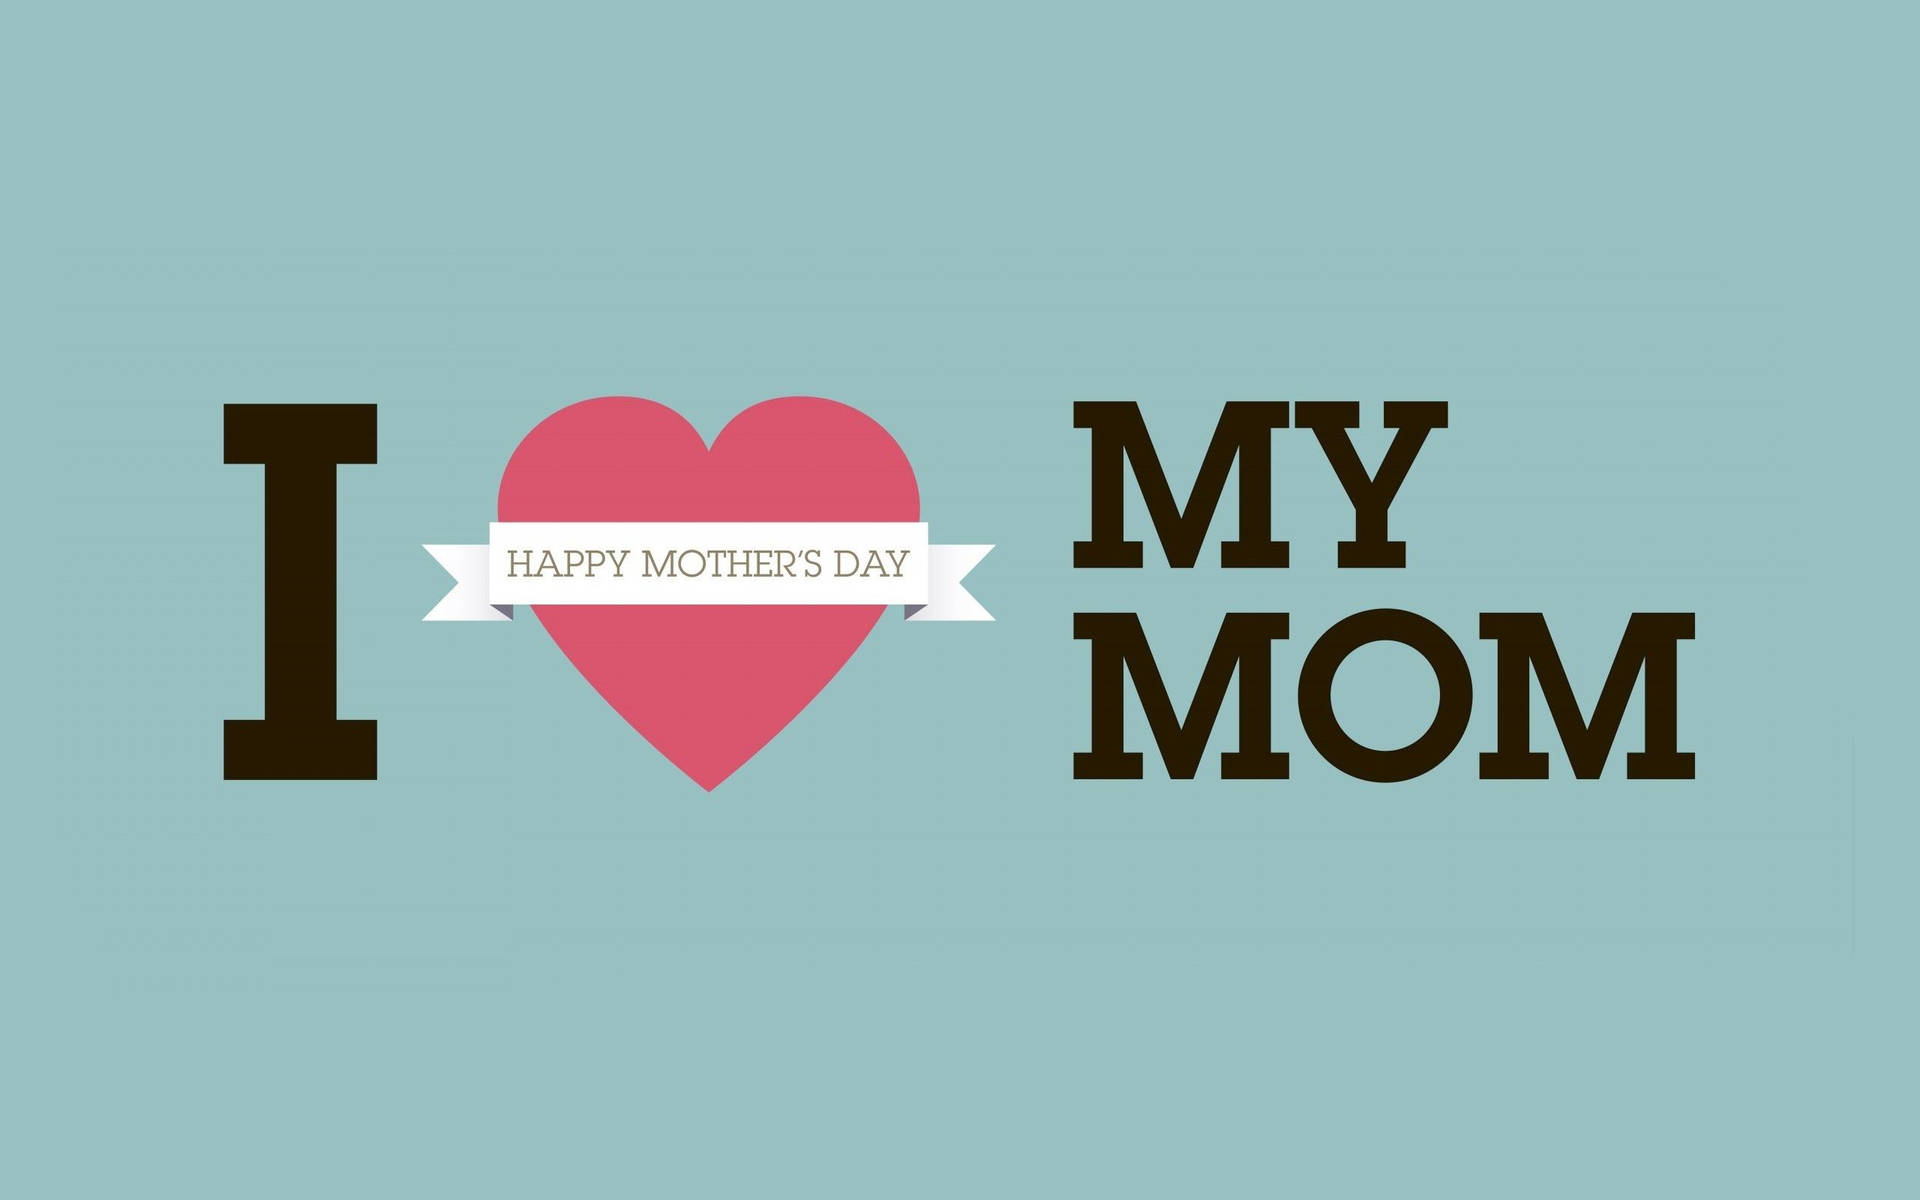 Mom And Son Poster For Mother's Day Wallpaper